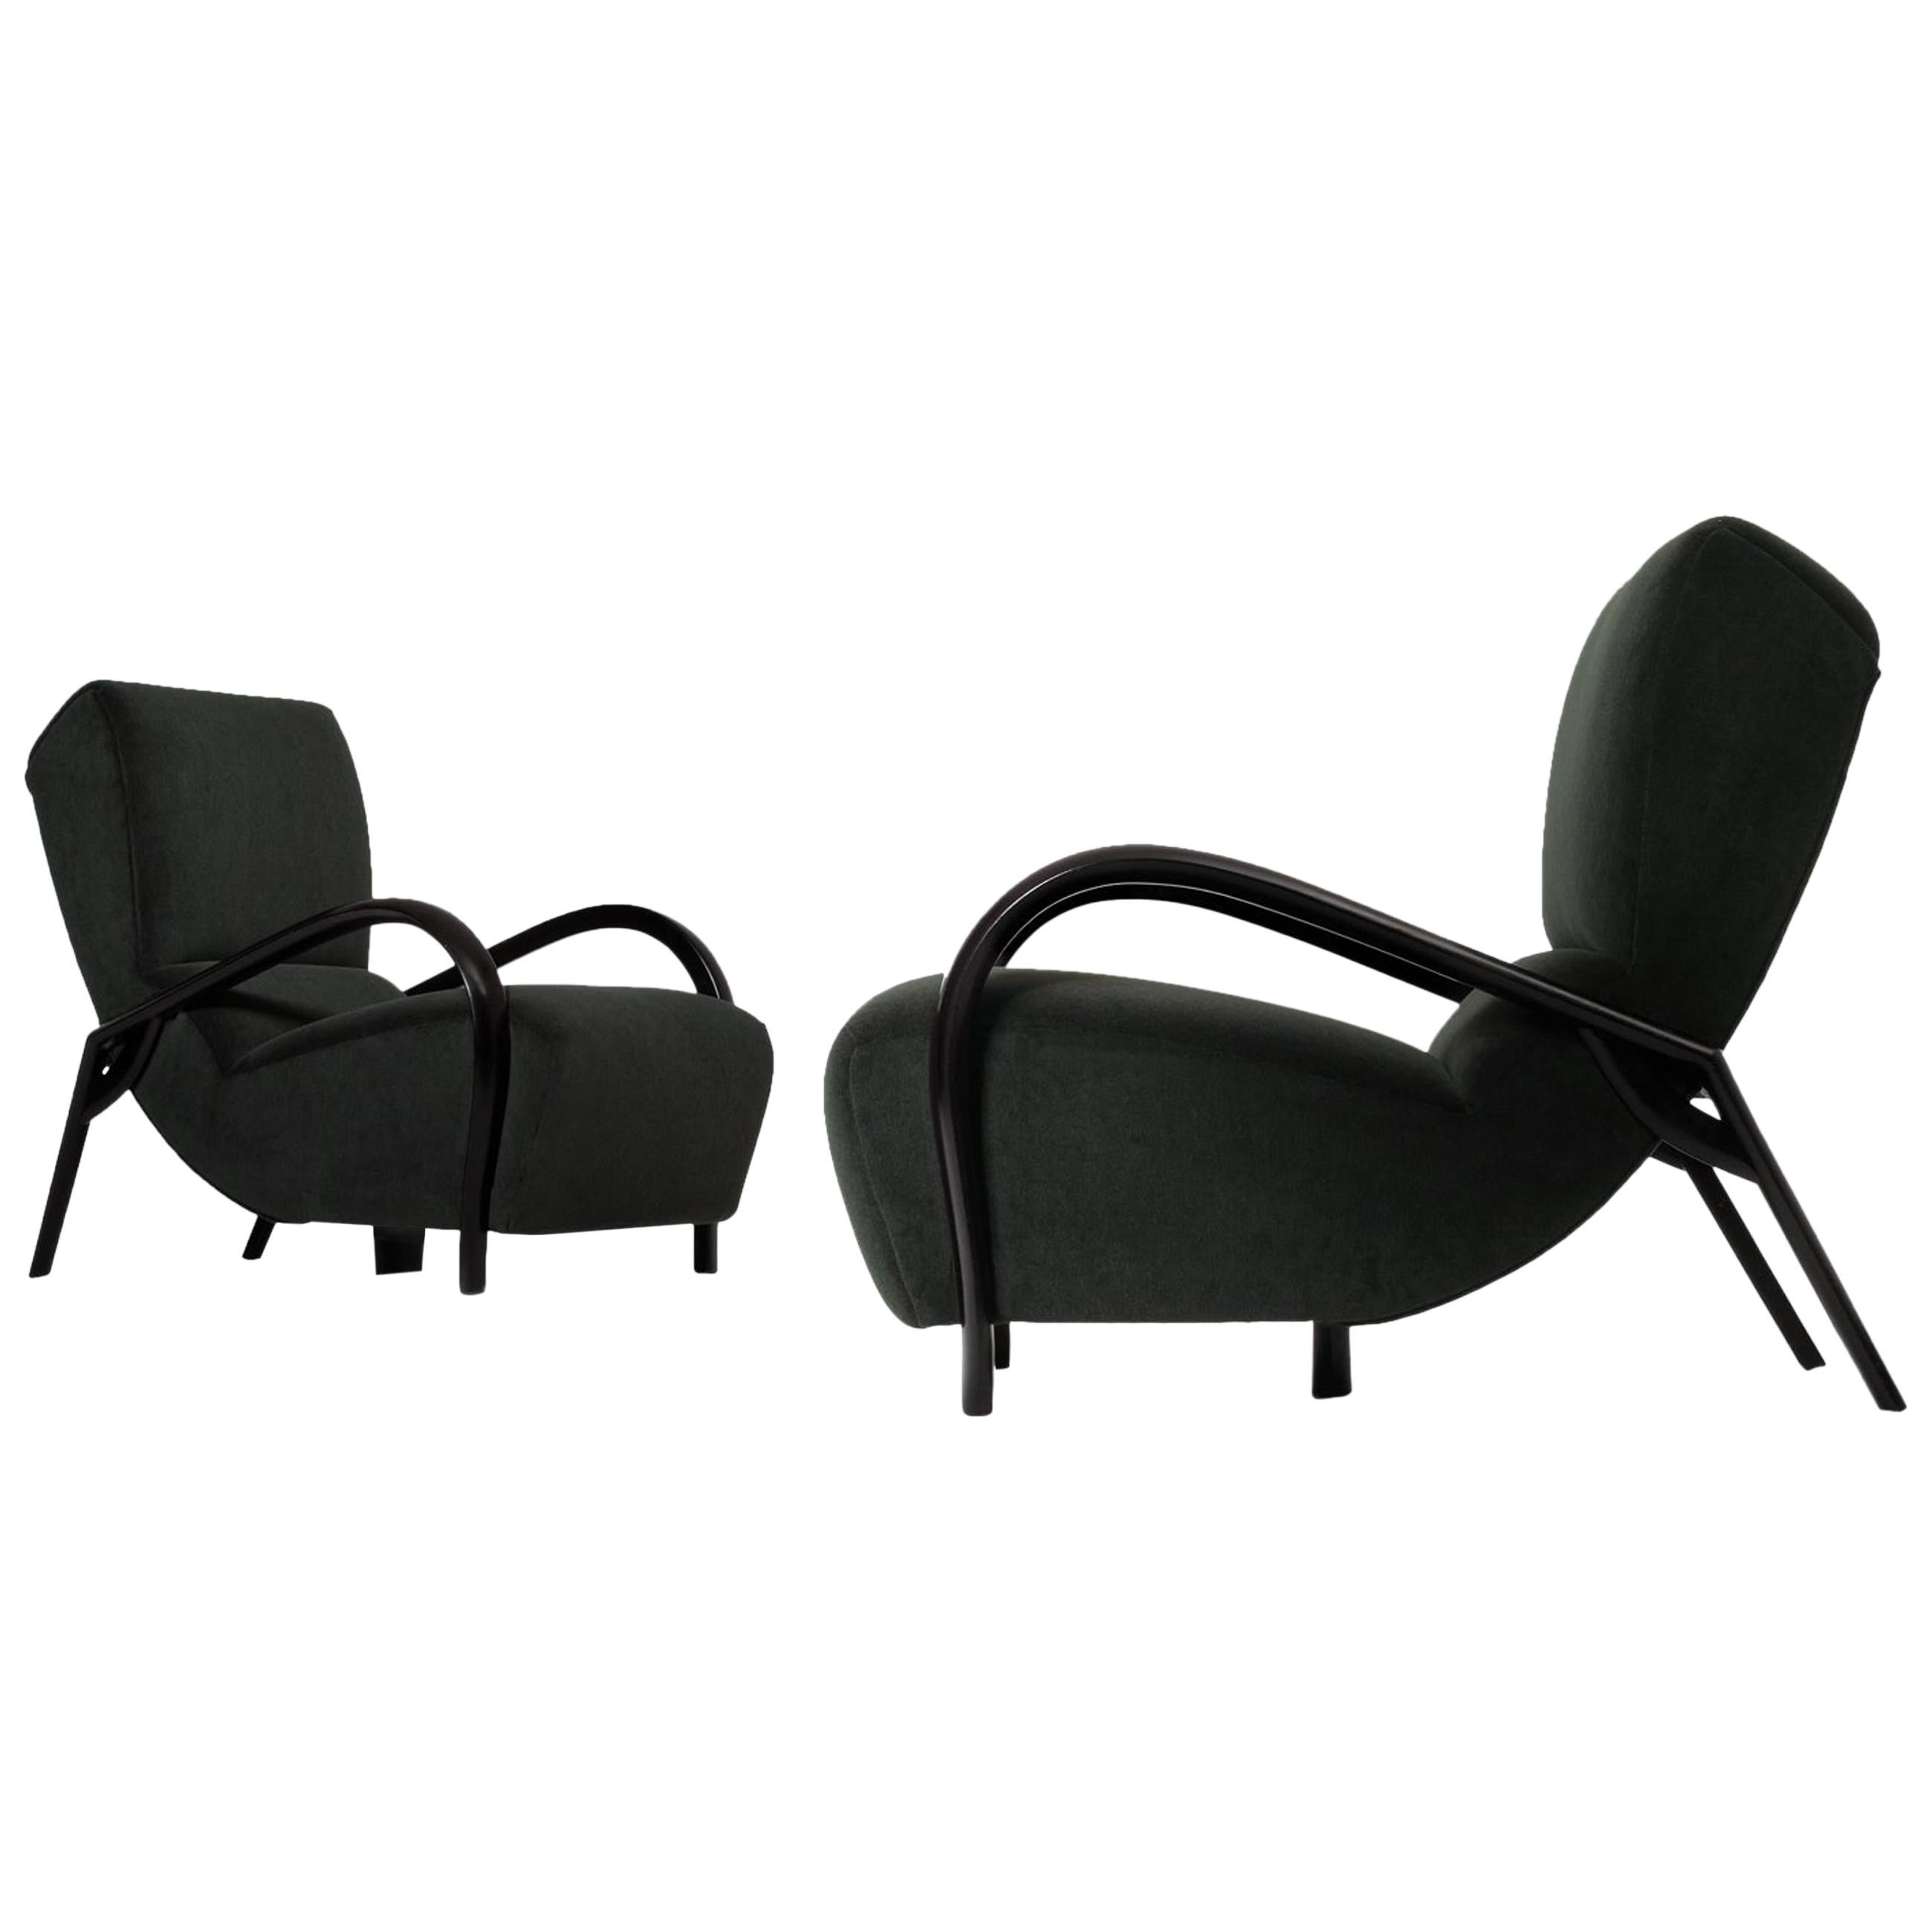 Pair Modern Curved Back Lounge Chairs At 1stdibs 